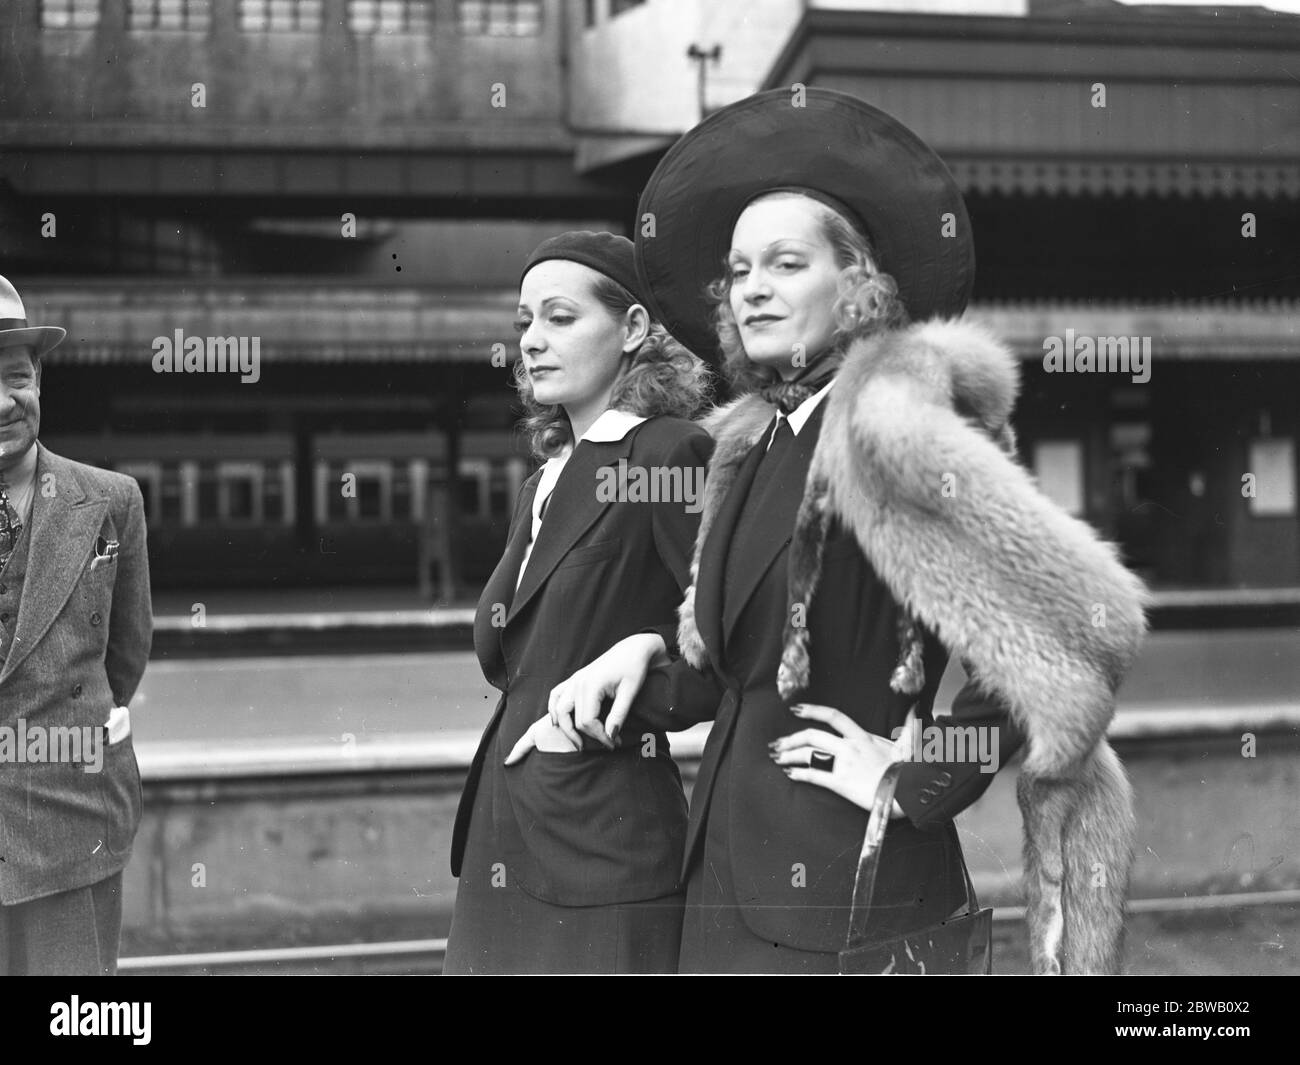 Film stars ' Doubles ' arrive at Paddington Station . Betty Dietrich ( ' Garbo ' ) , left and Carole Dietrich ( ' Marlene Dietrich ' ) 1938 Stock Photo